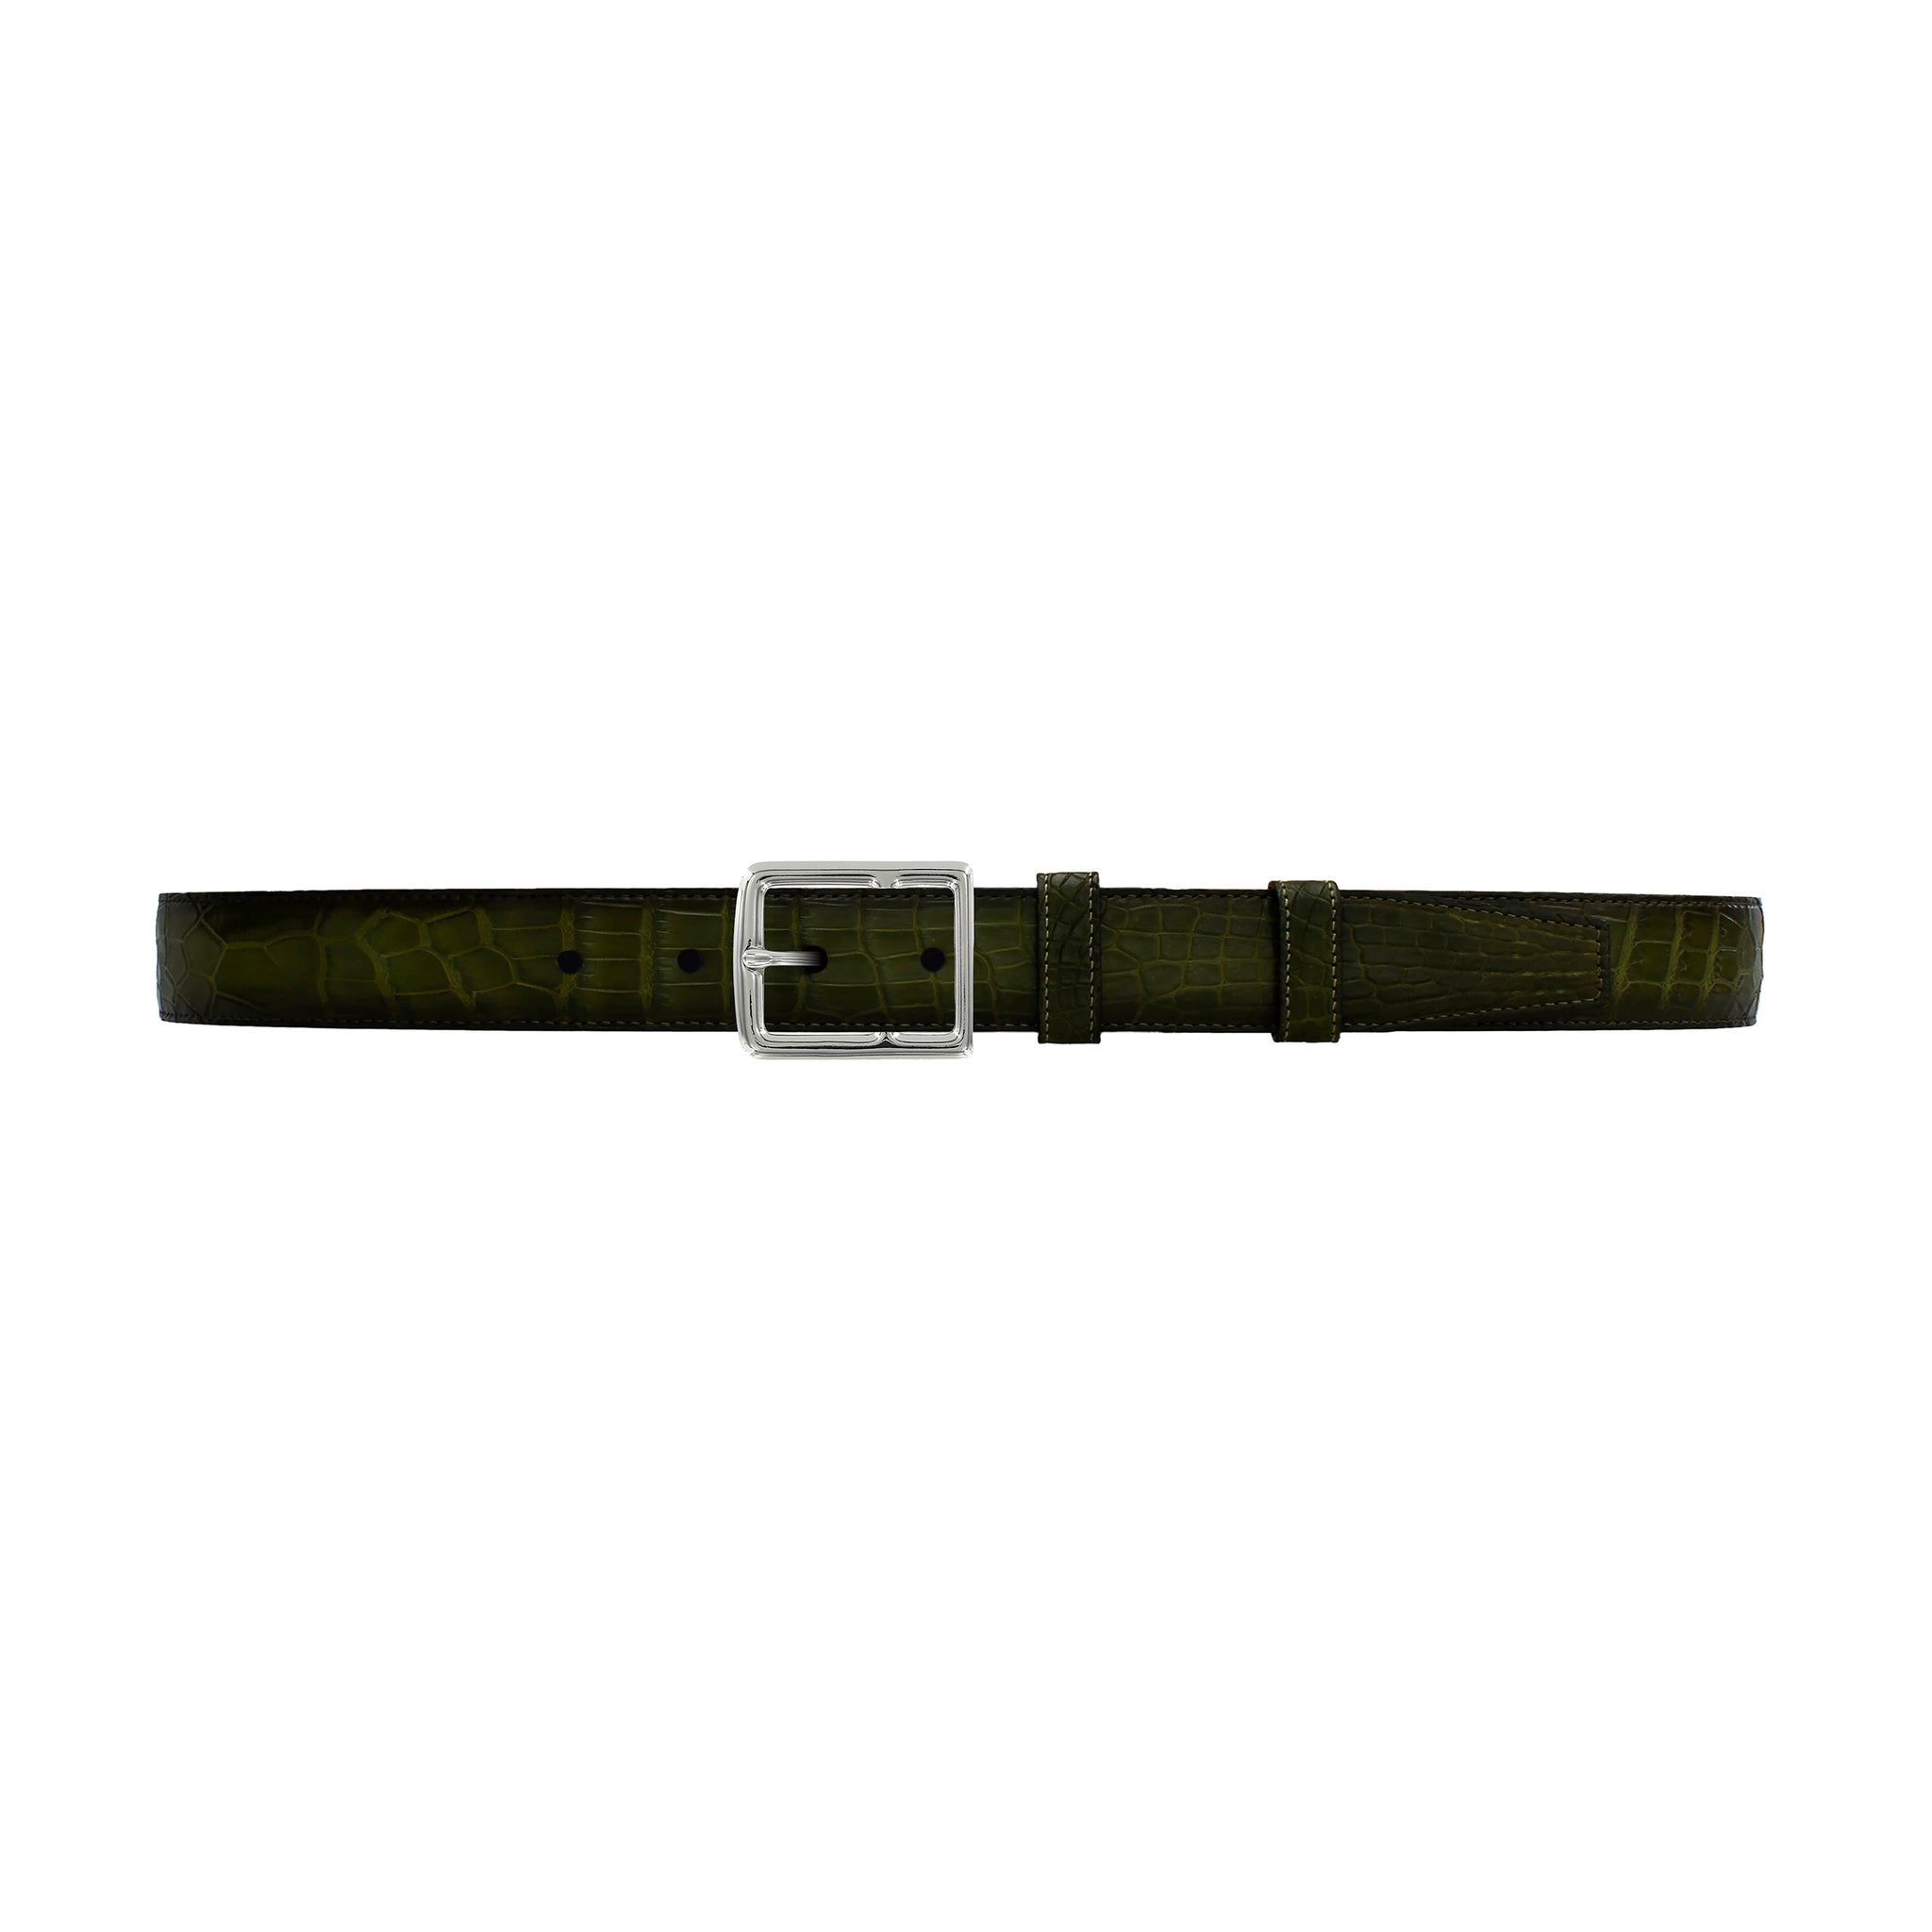 1" Olive Patina Belt with Crawford Casual Buckle in Polished Nickel